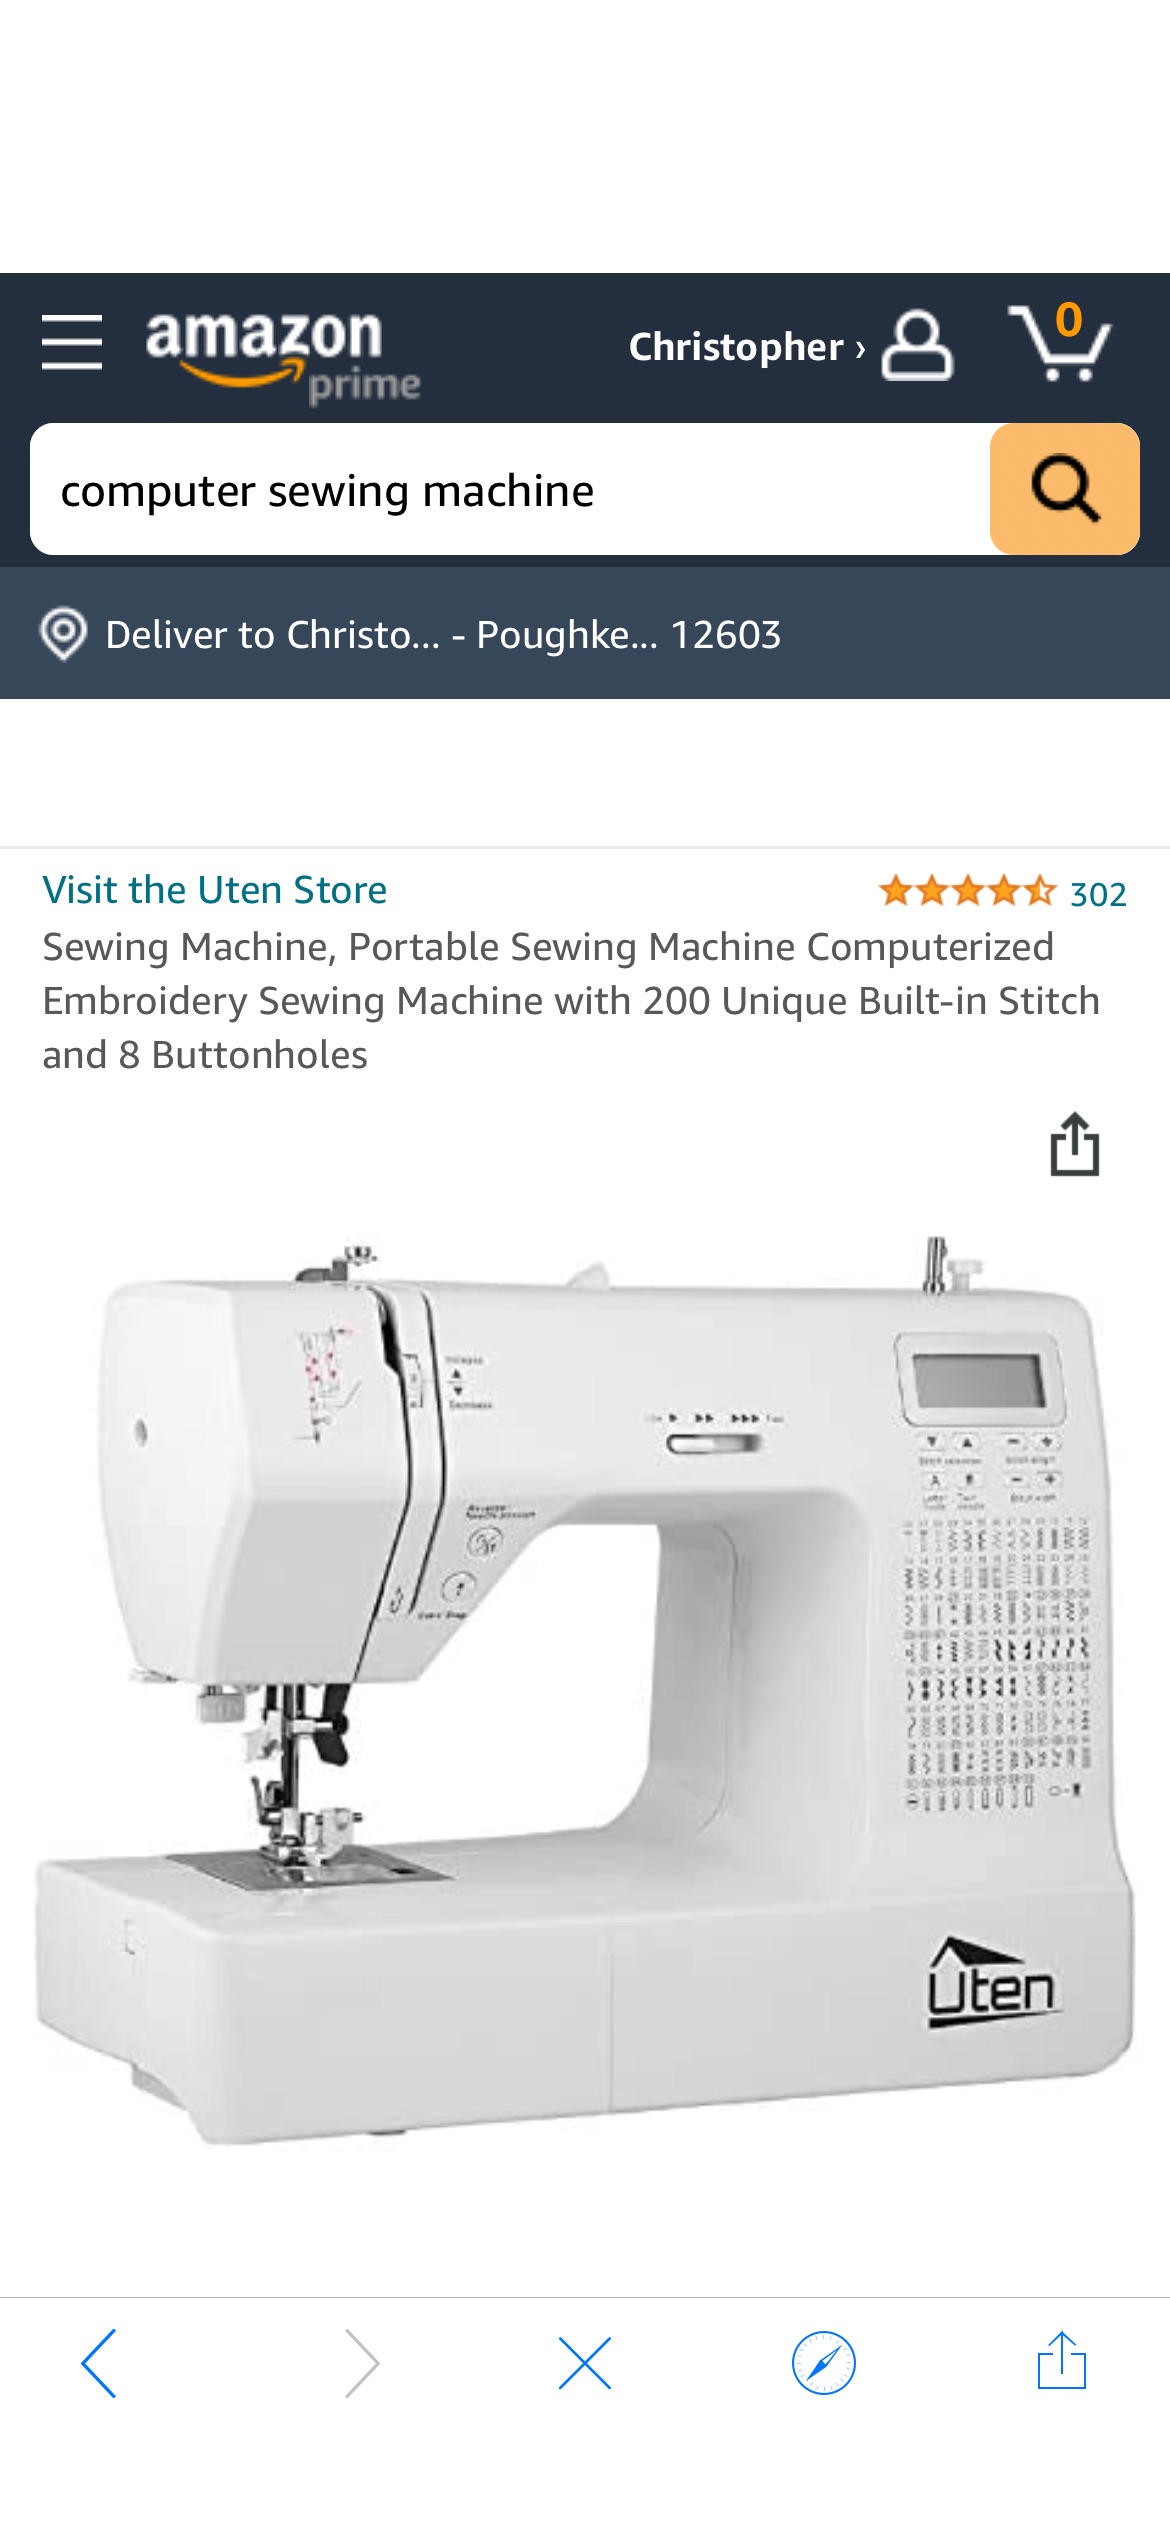 Amazon.com: Sewing Machine, Portable Sewing Machine Computerized Embroidery Sewing Machine with 200 Unique Built-in Stitch电脑缝纫机